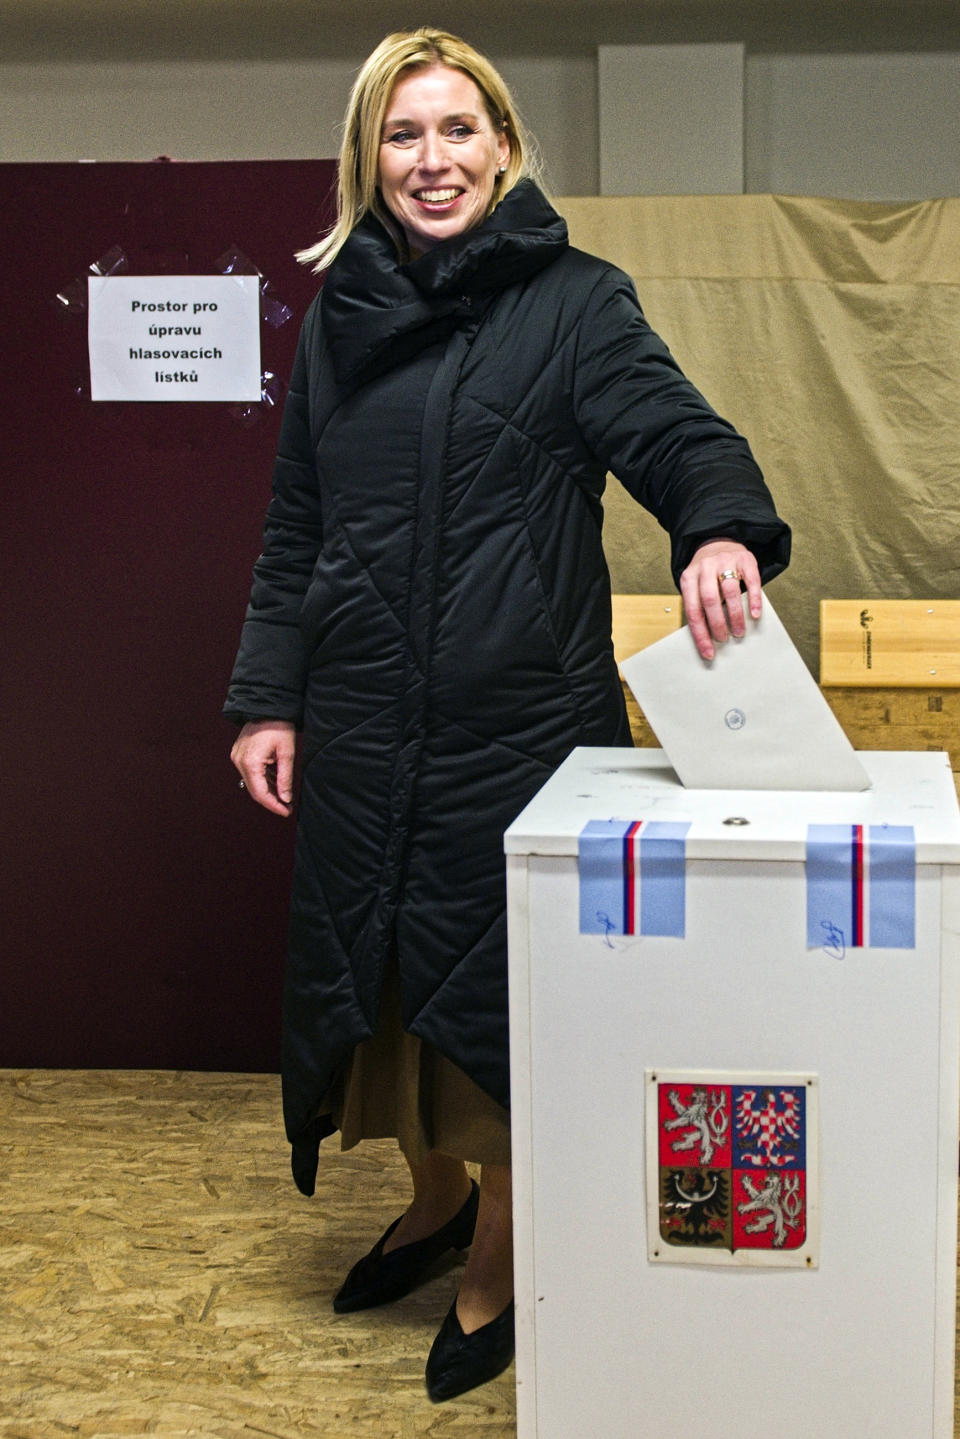 Czech Presidential Candidate Danuse Nerudova casts her vote in the first round of the presidential election, in Kurim, Czech Republic, Friday Jan. 13, 2023. (Patrik Uhlir/CTK via AP)